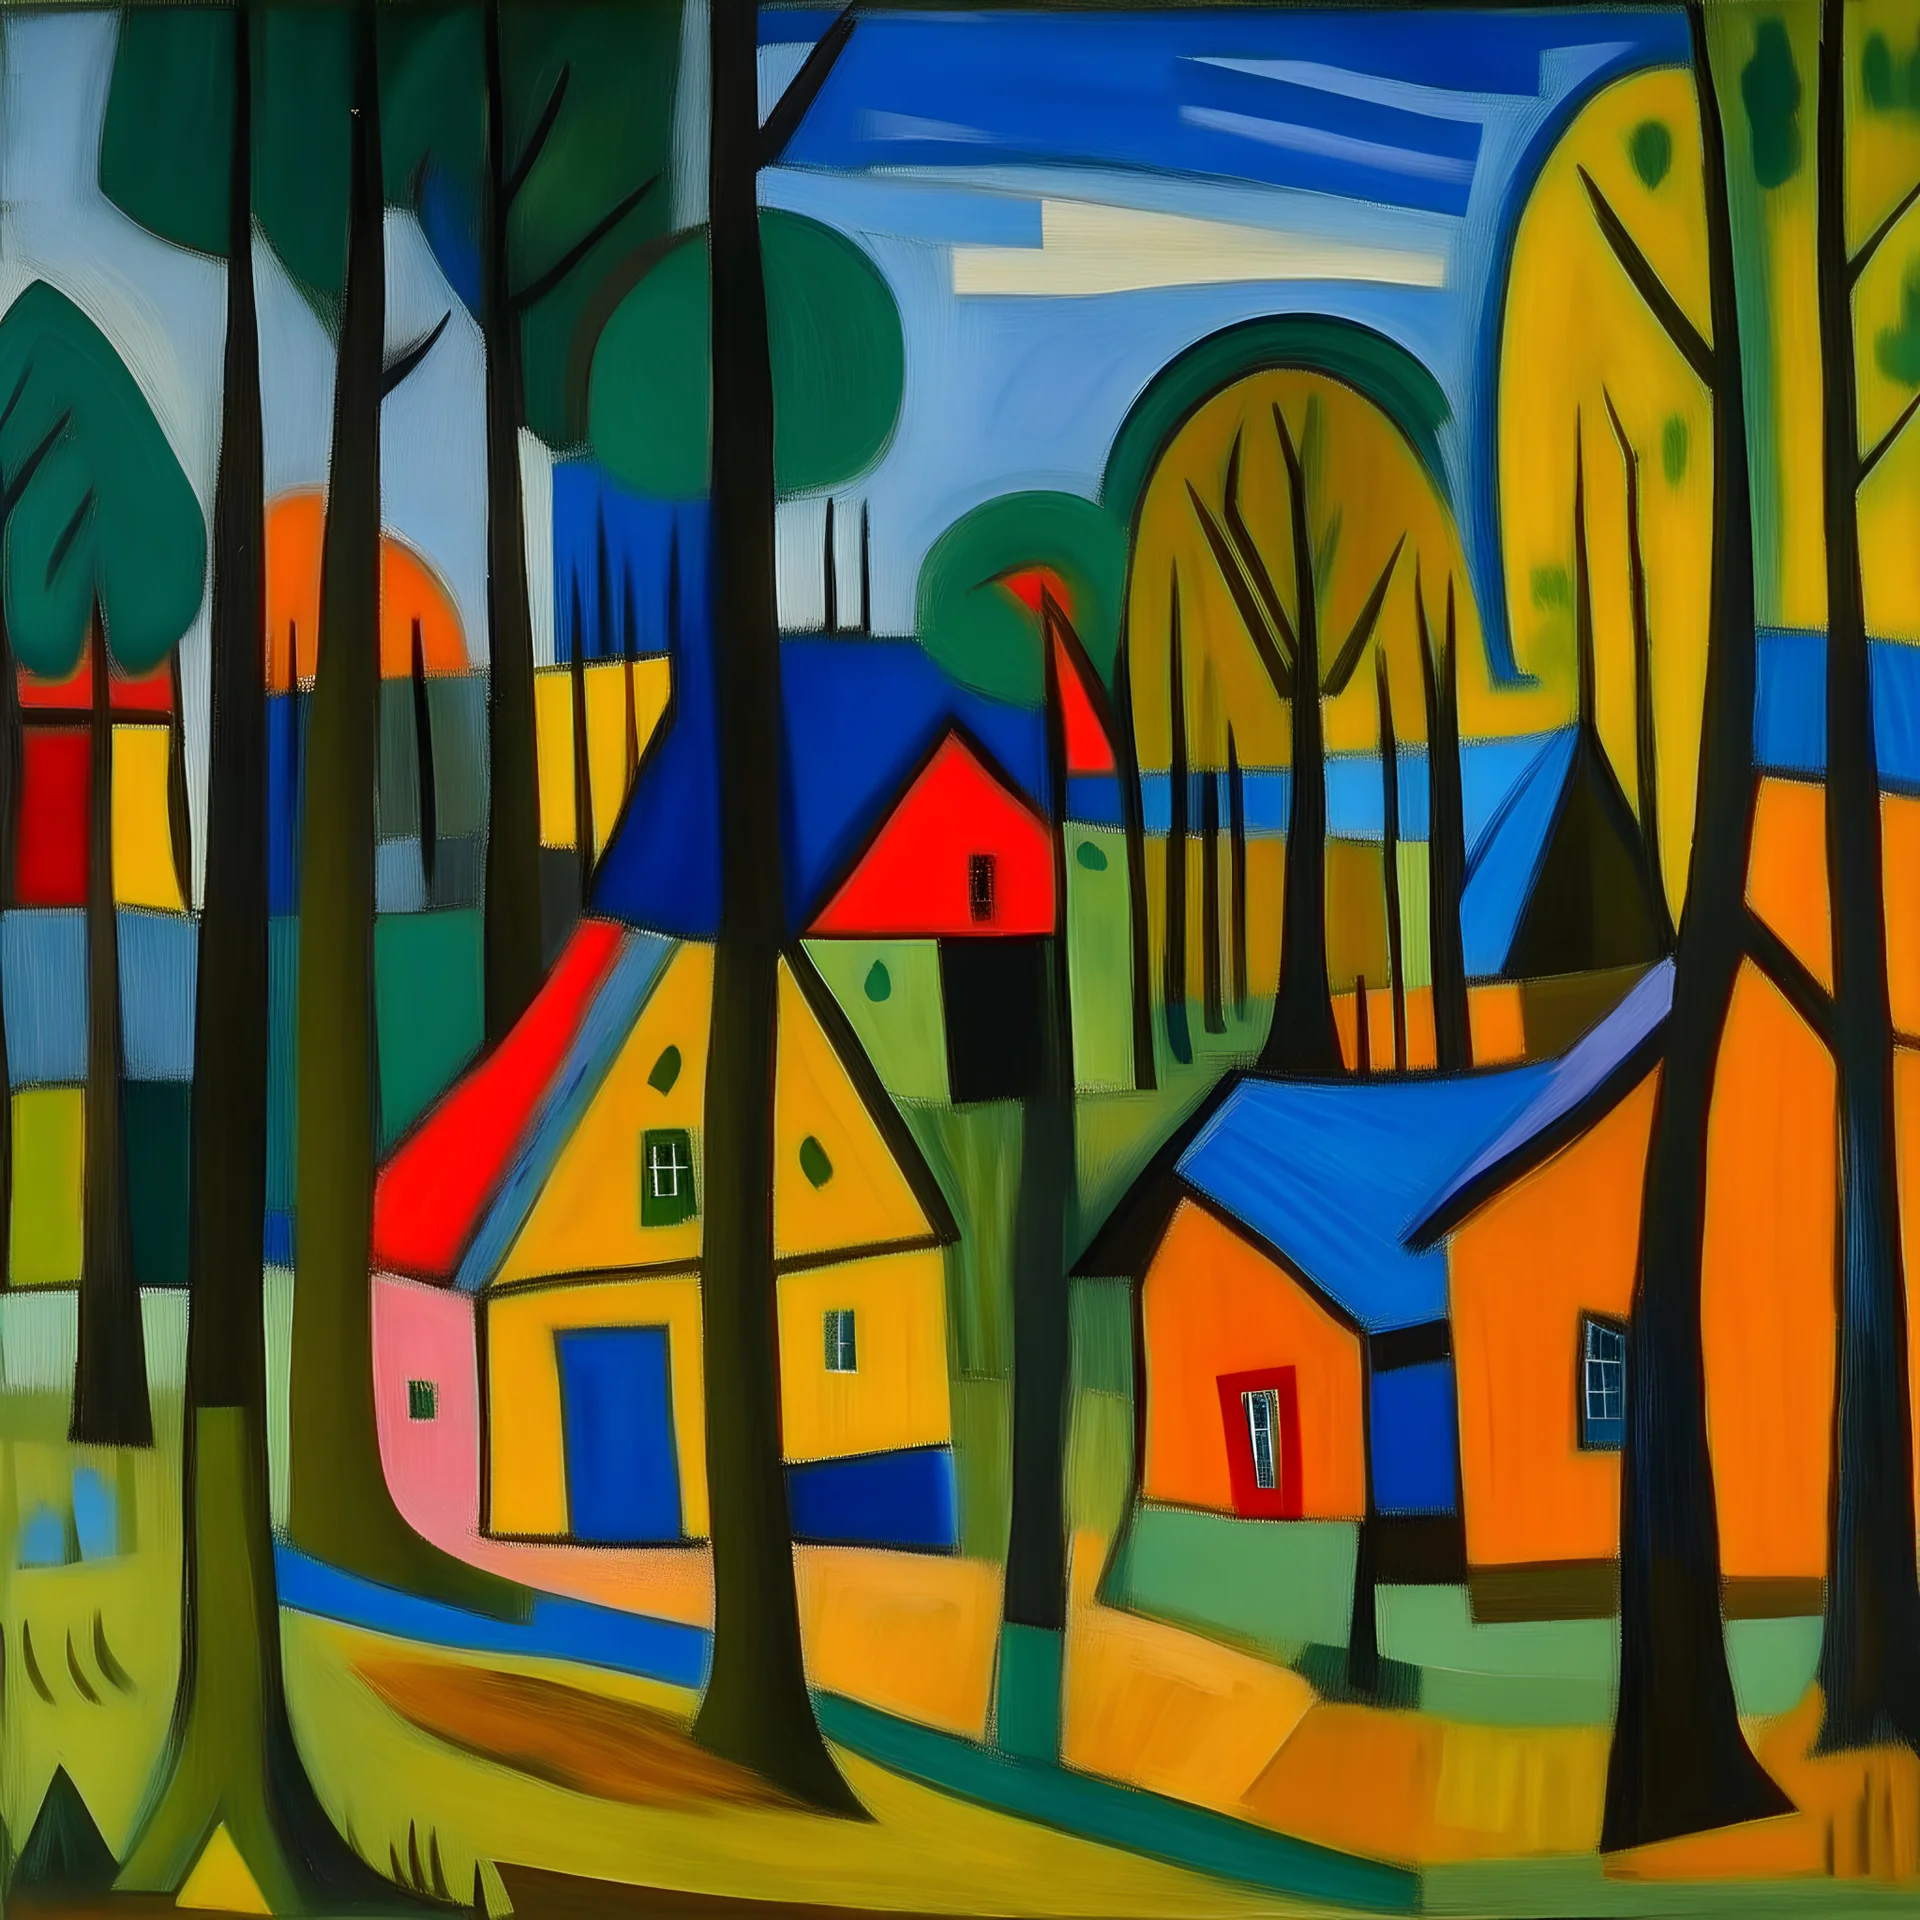 A village made out of wood near a forest painted by Alexej von Jawlensky